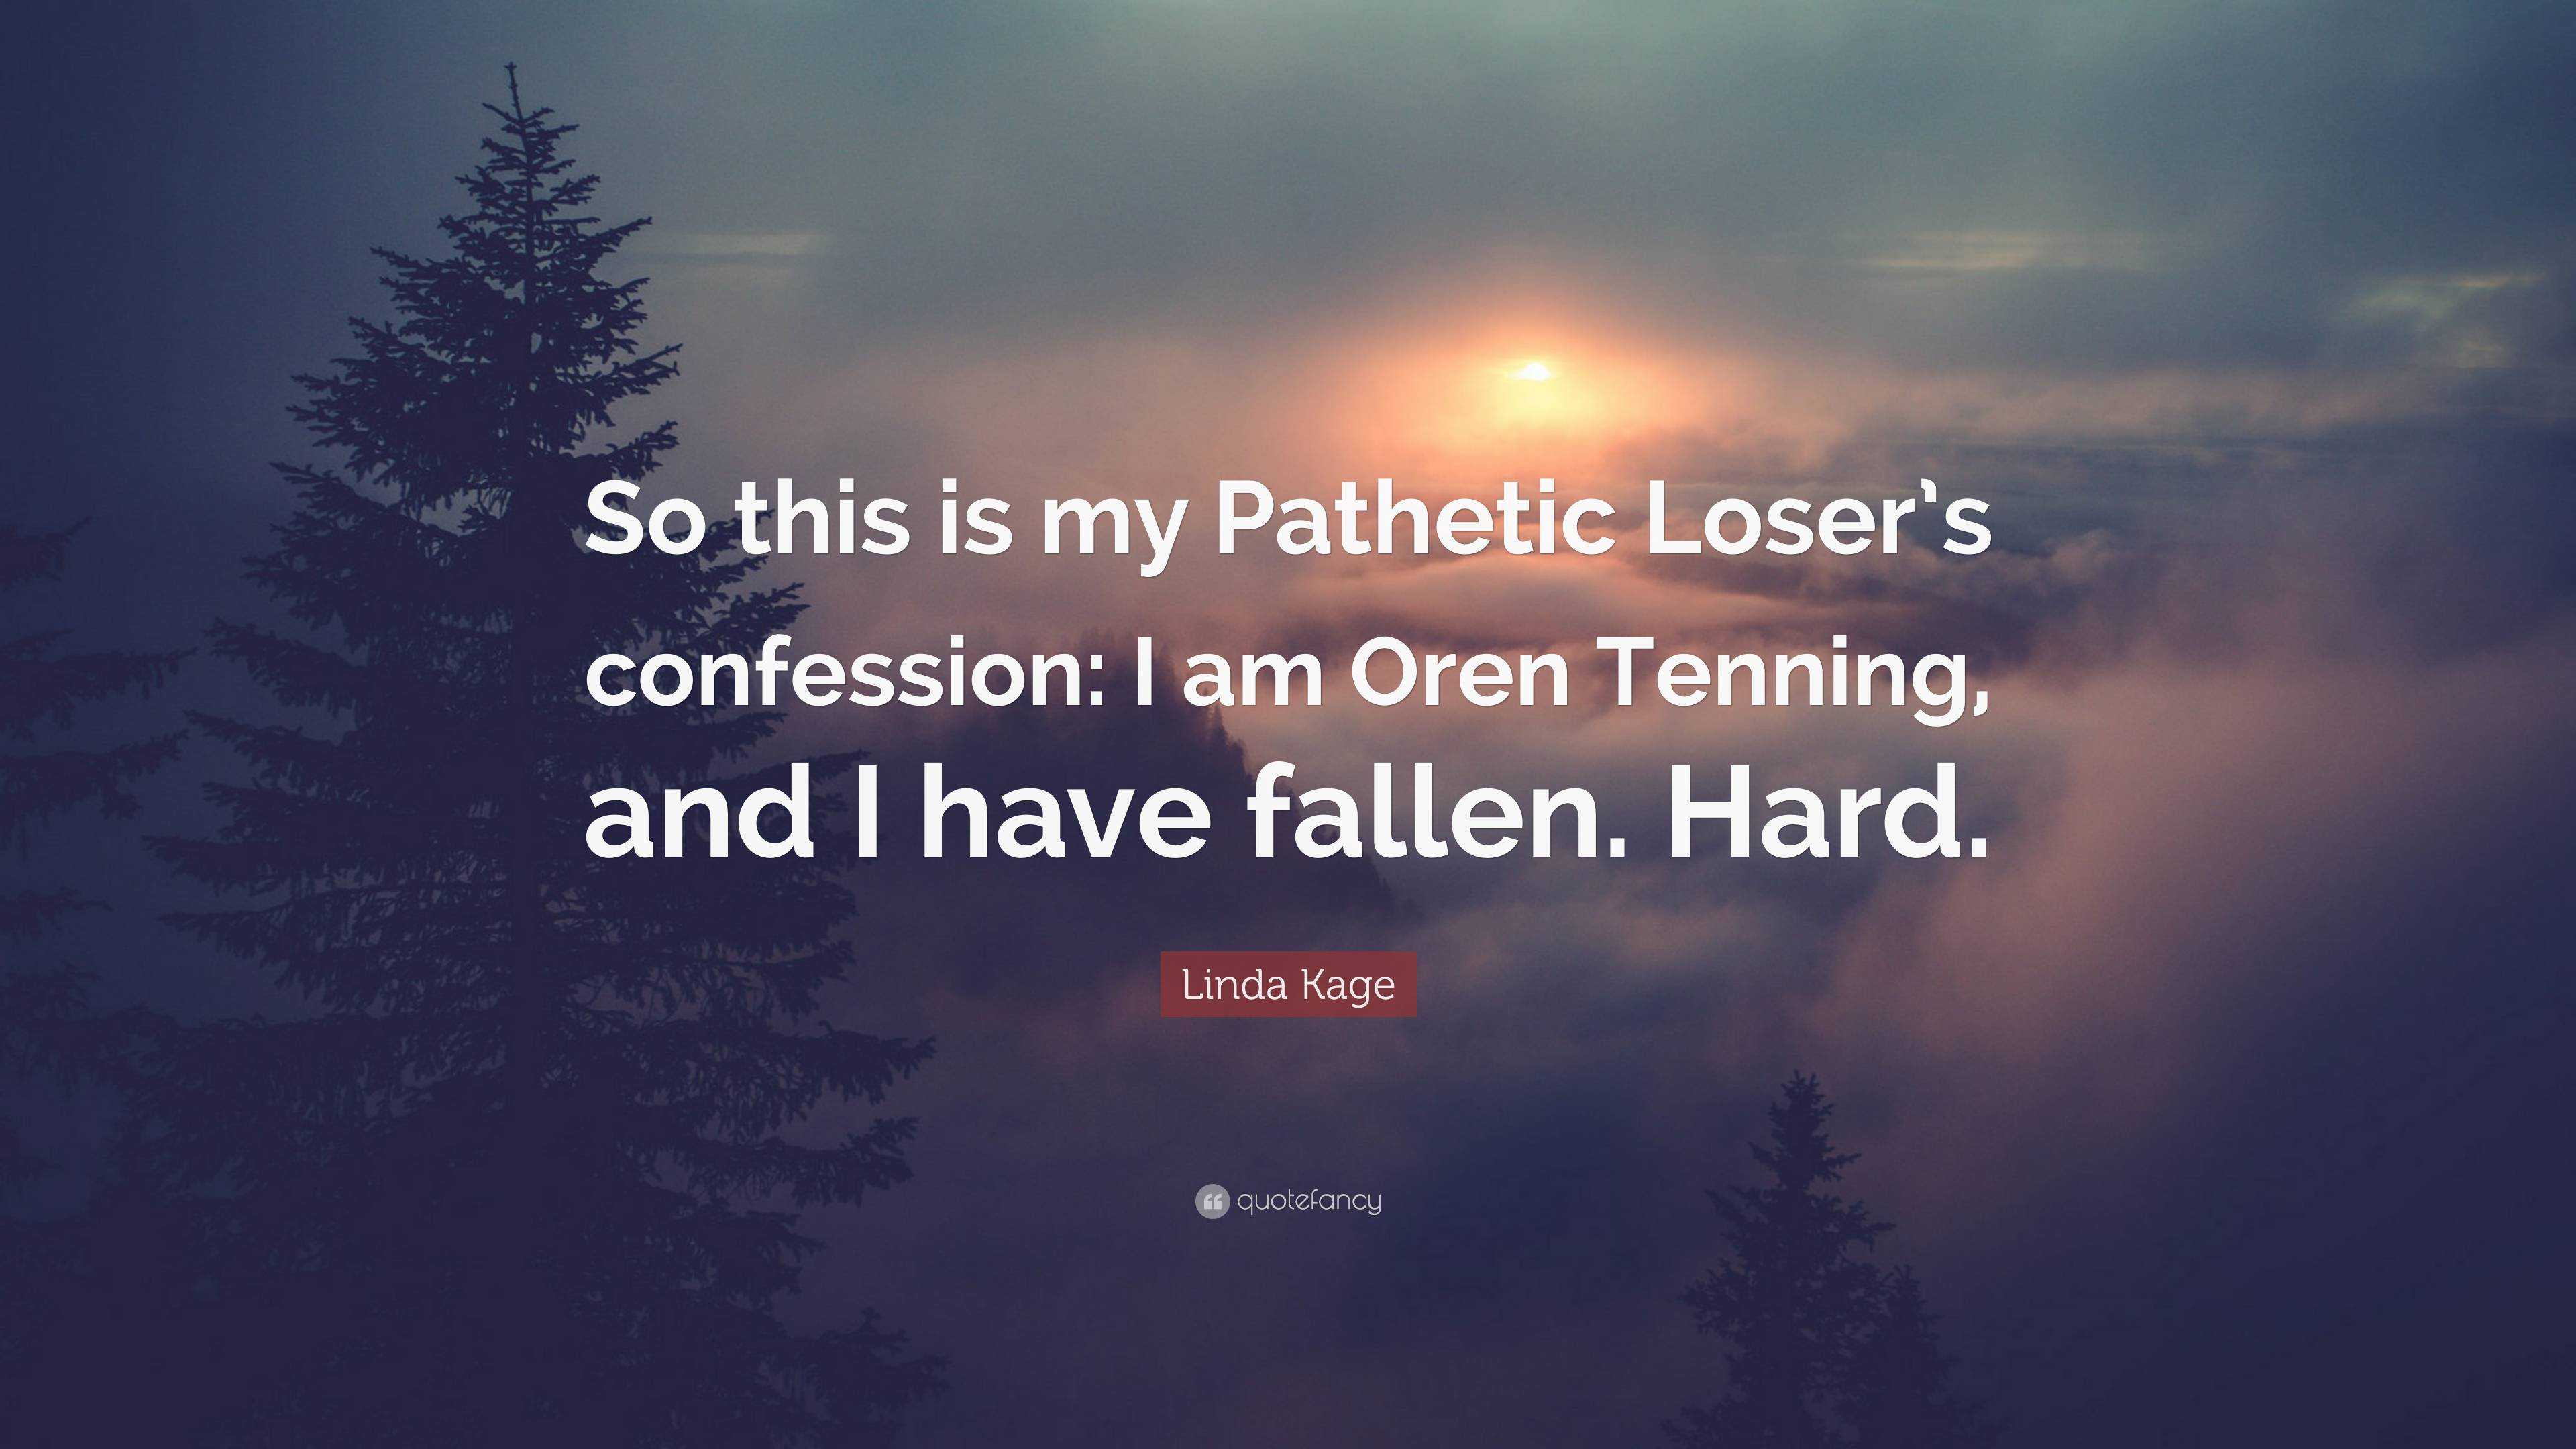 Linda Kage Quote: “So this is my Pathetic Loser's confession: I am Oren  Tenning, and I